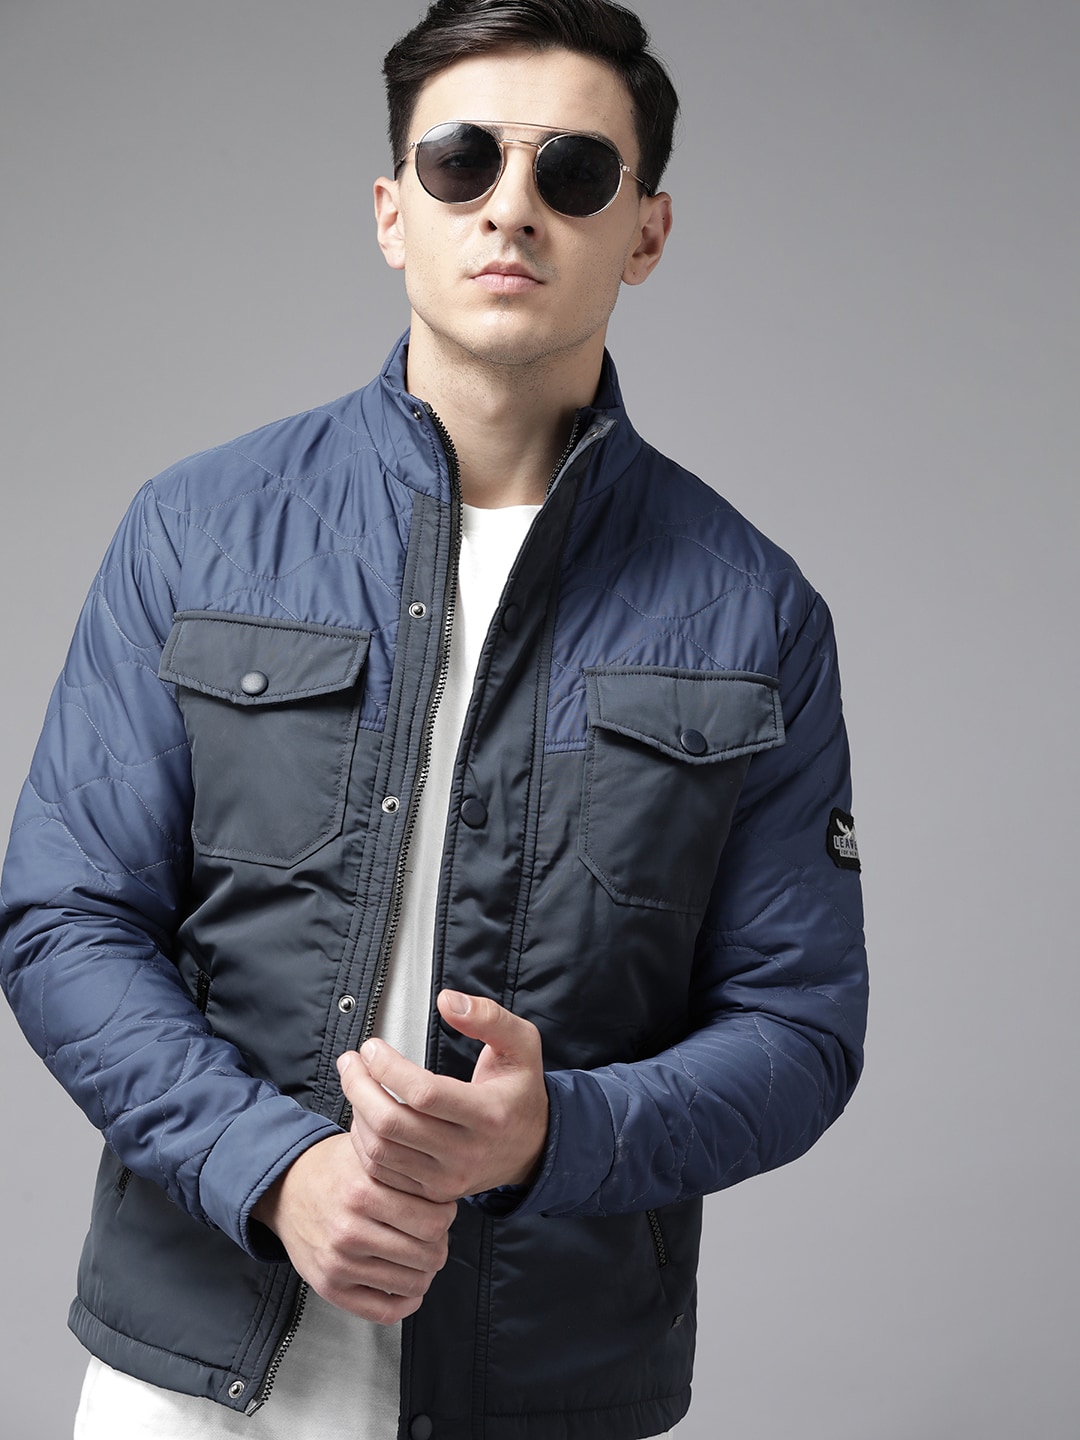 The Roadster Lifestyle Co. Colourblocked Quilted Jacket